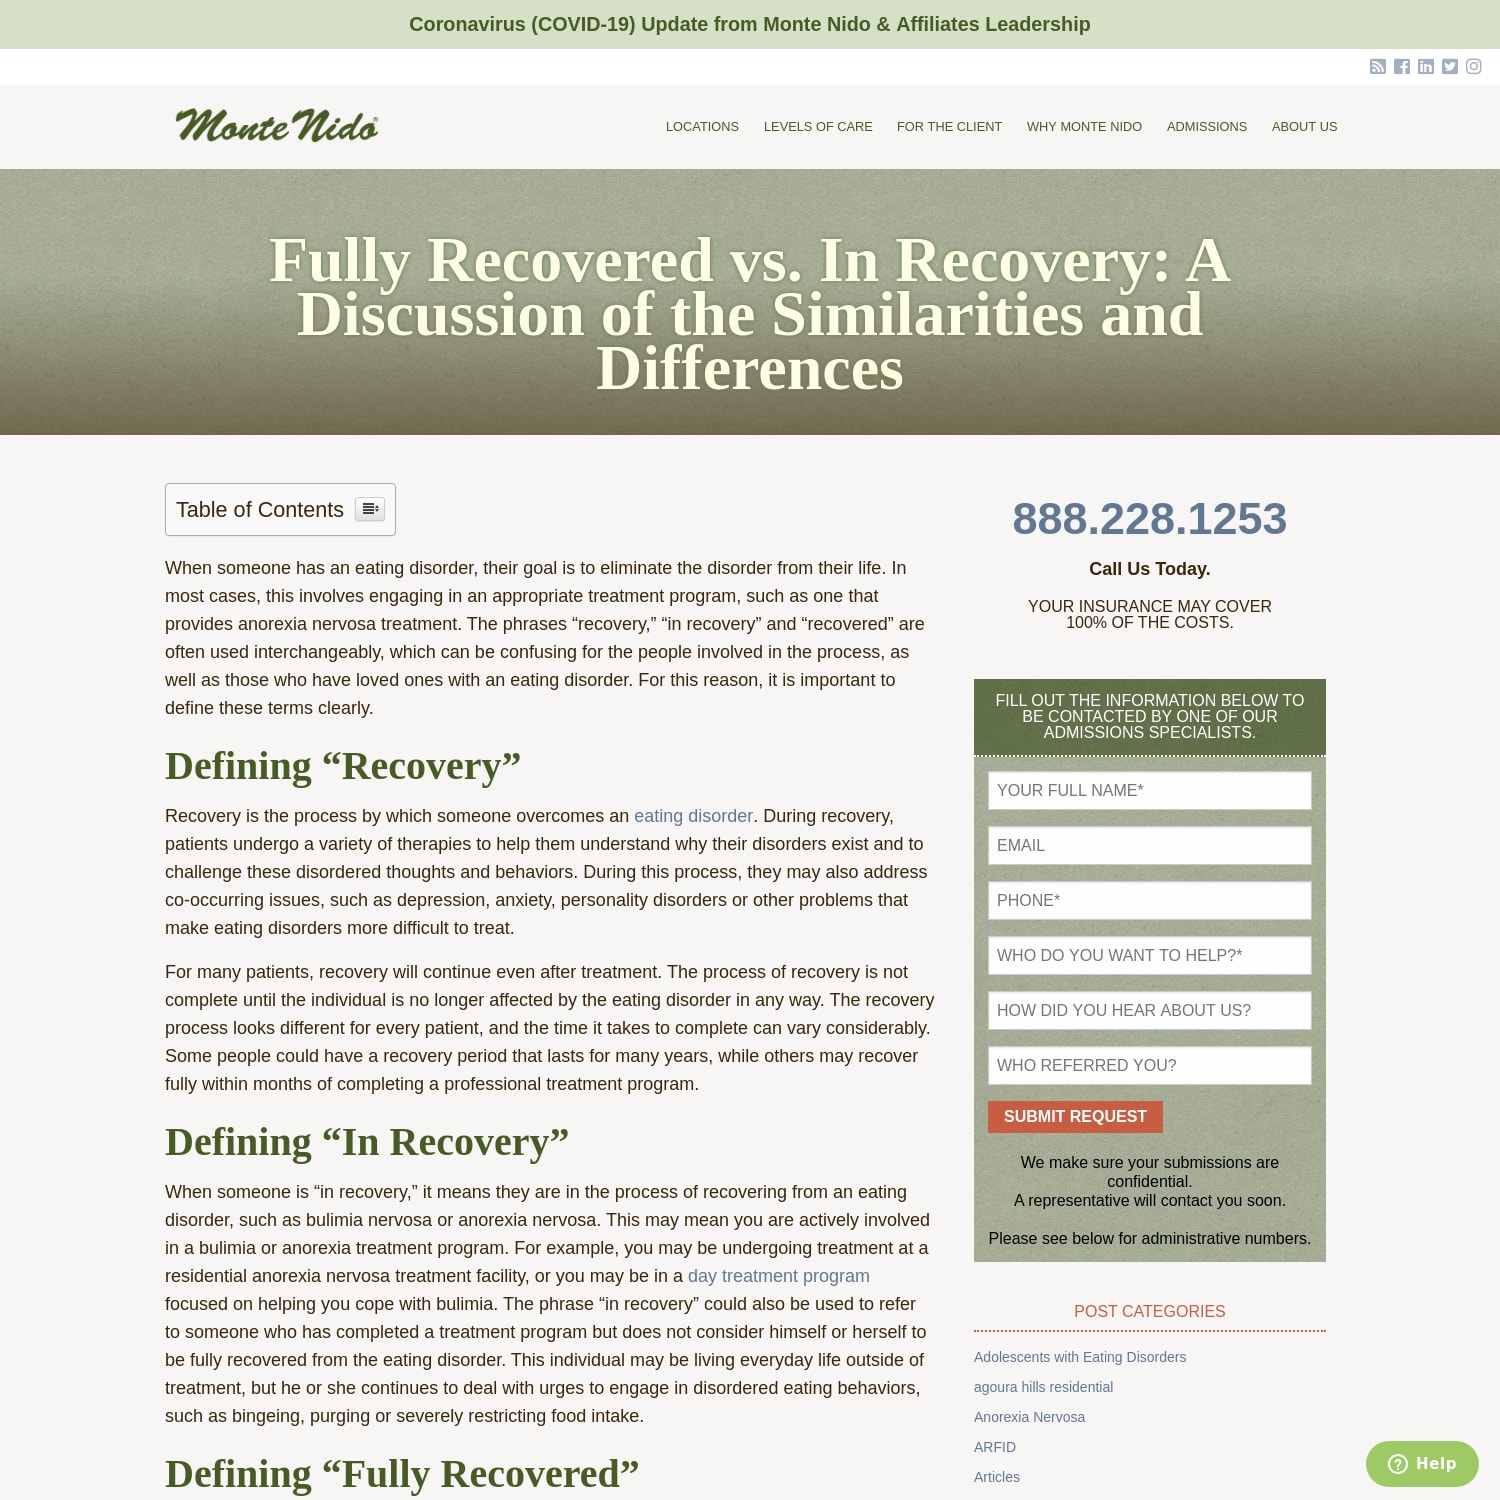 Fully Recovered vs. In Recovery: A Discussion of the Similarities and Differences